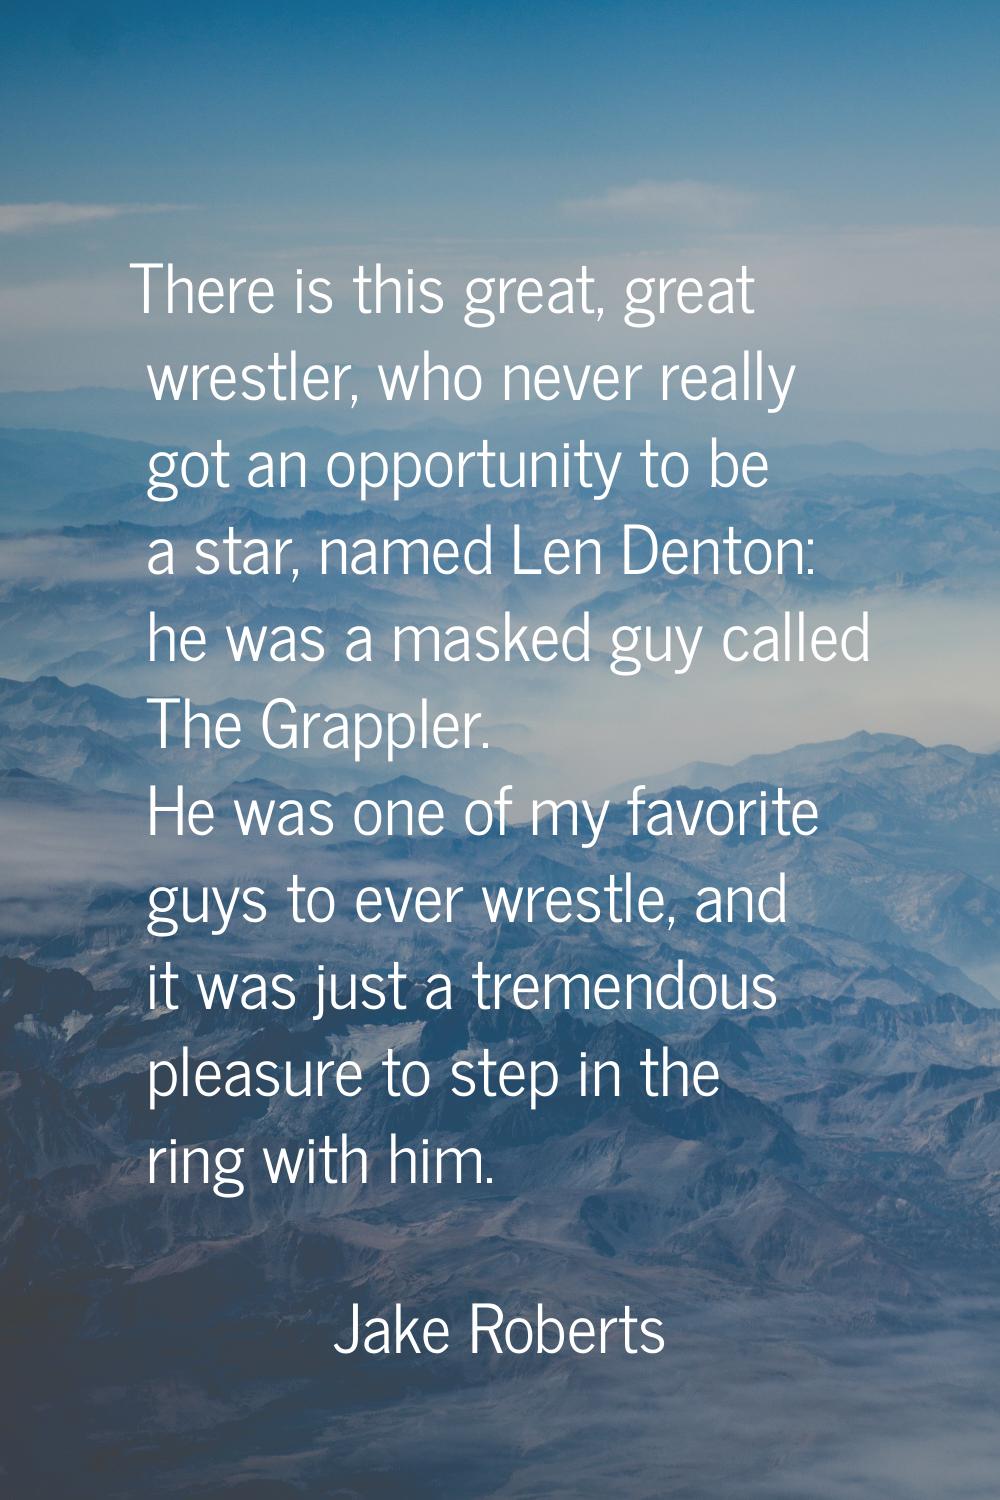 There is this great, great wrestler, who never really got an opportunity to be a star, named Len De